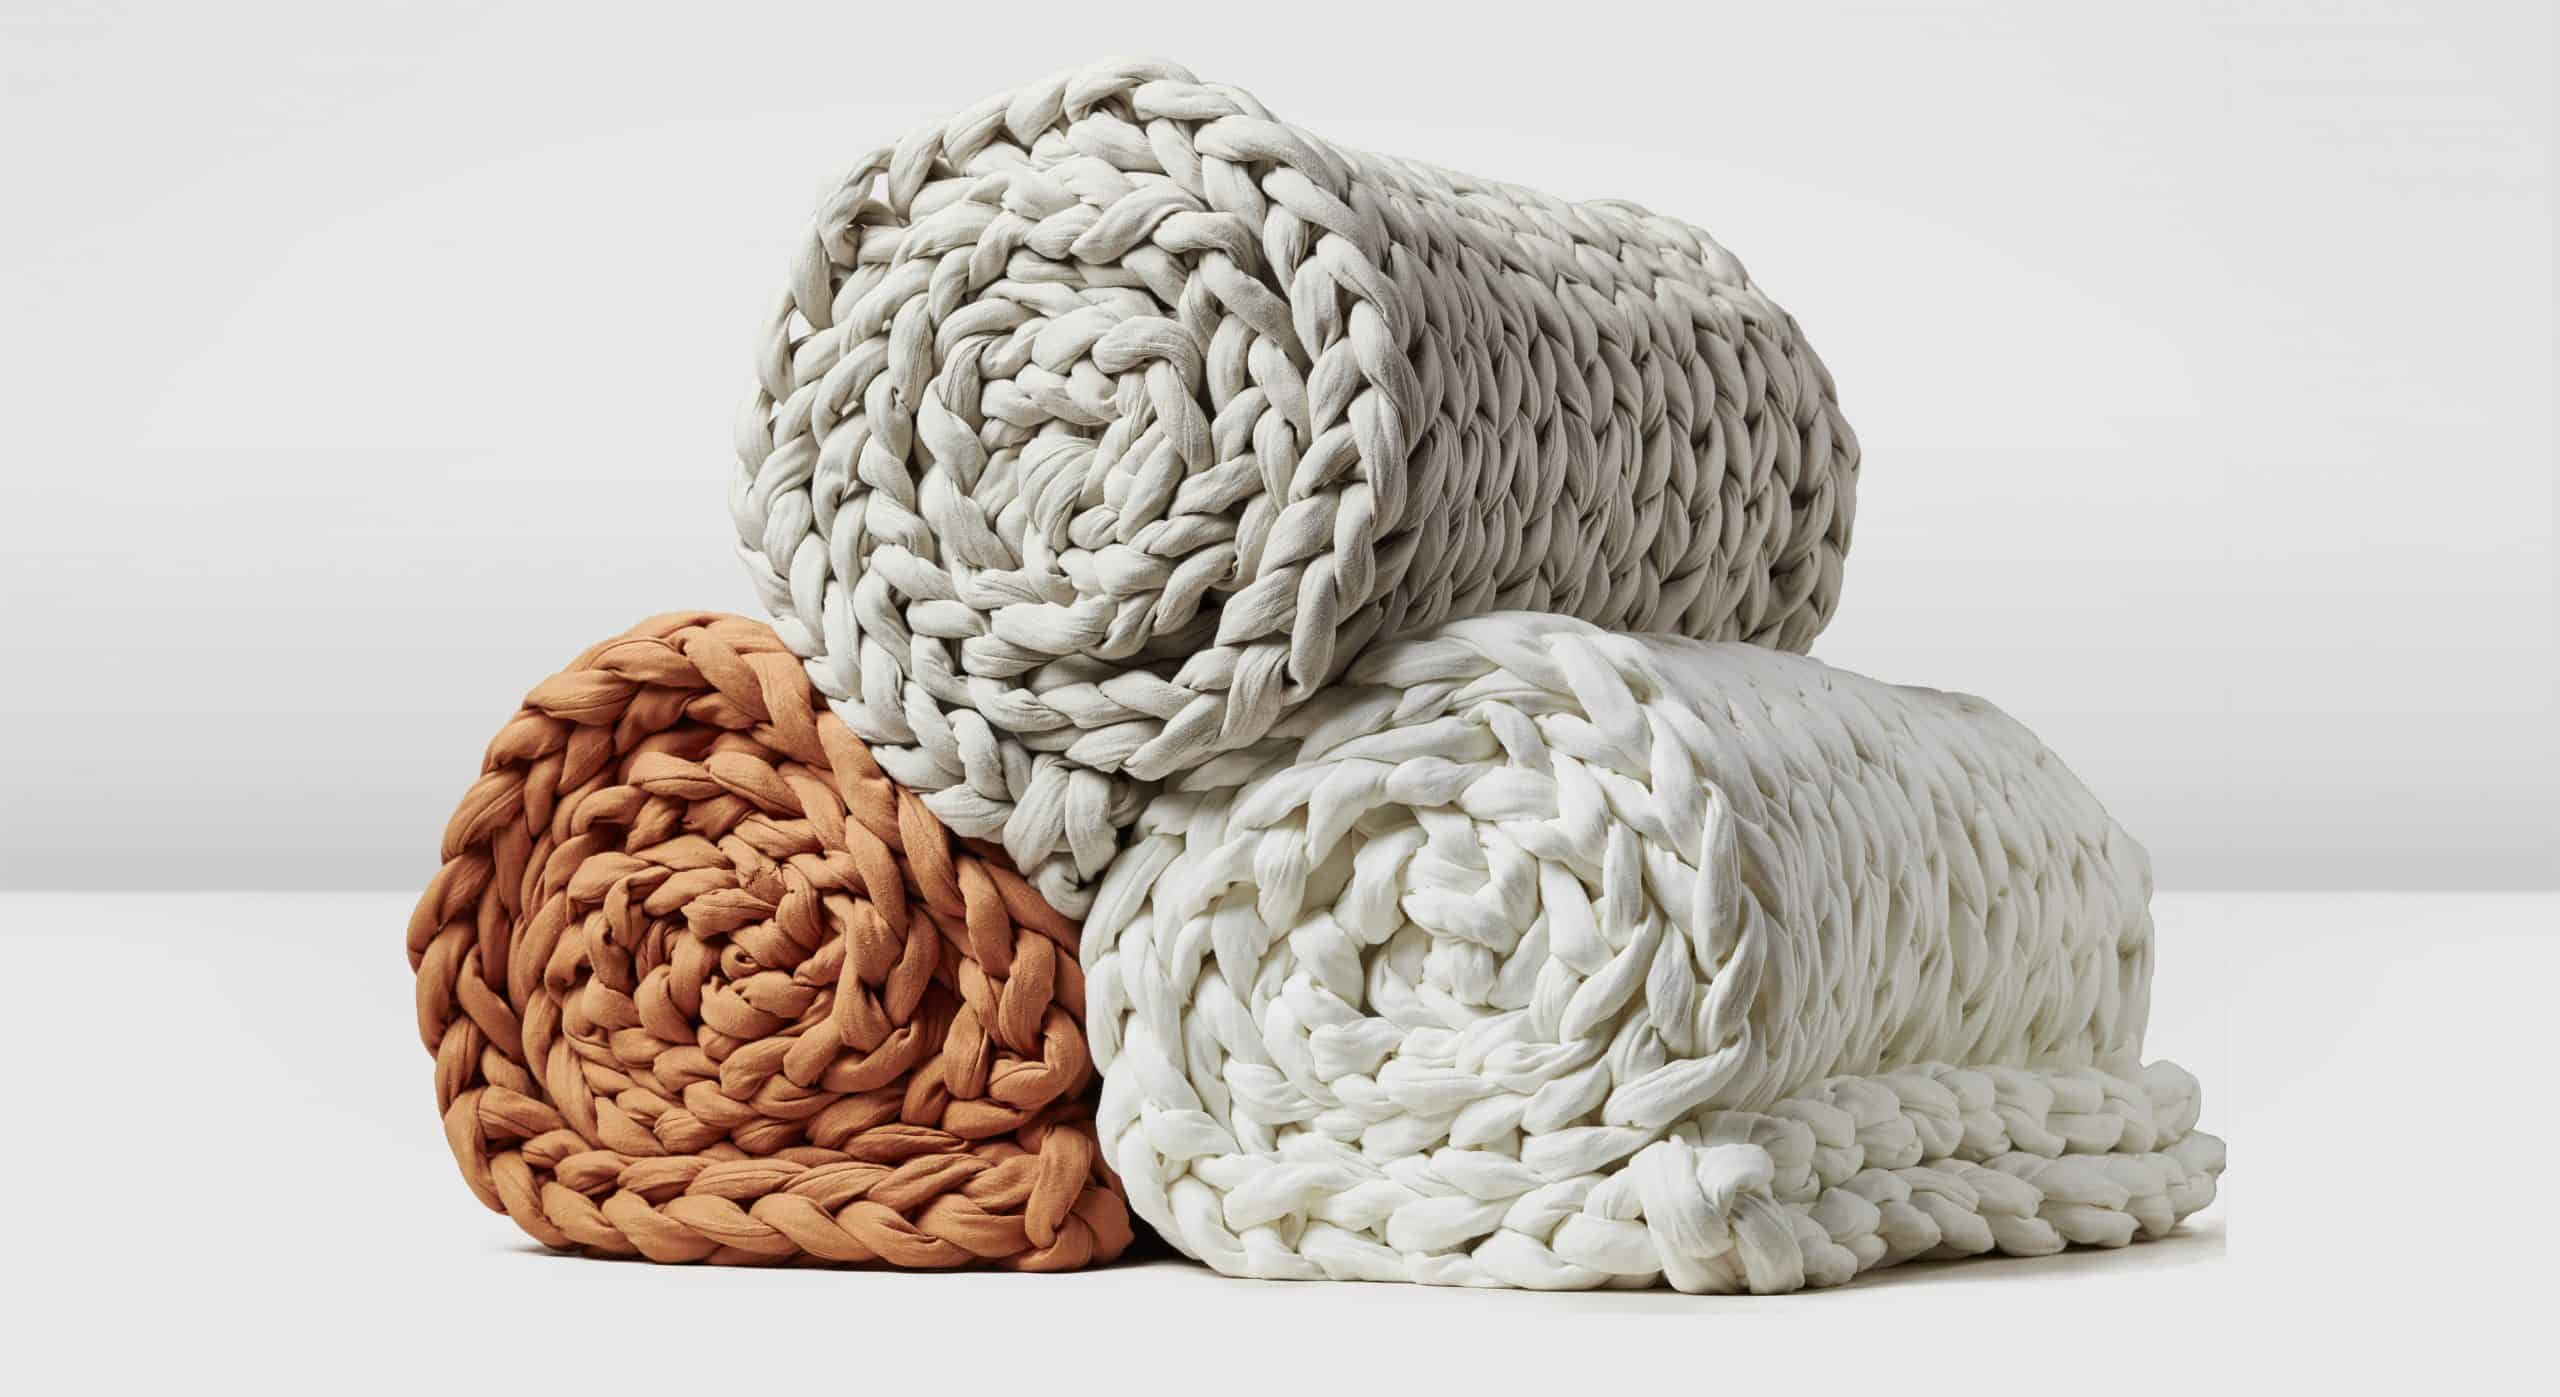 Three rolled up hand-knit weighted blankets stacked on top of one another pyramid-style.